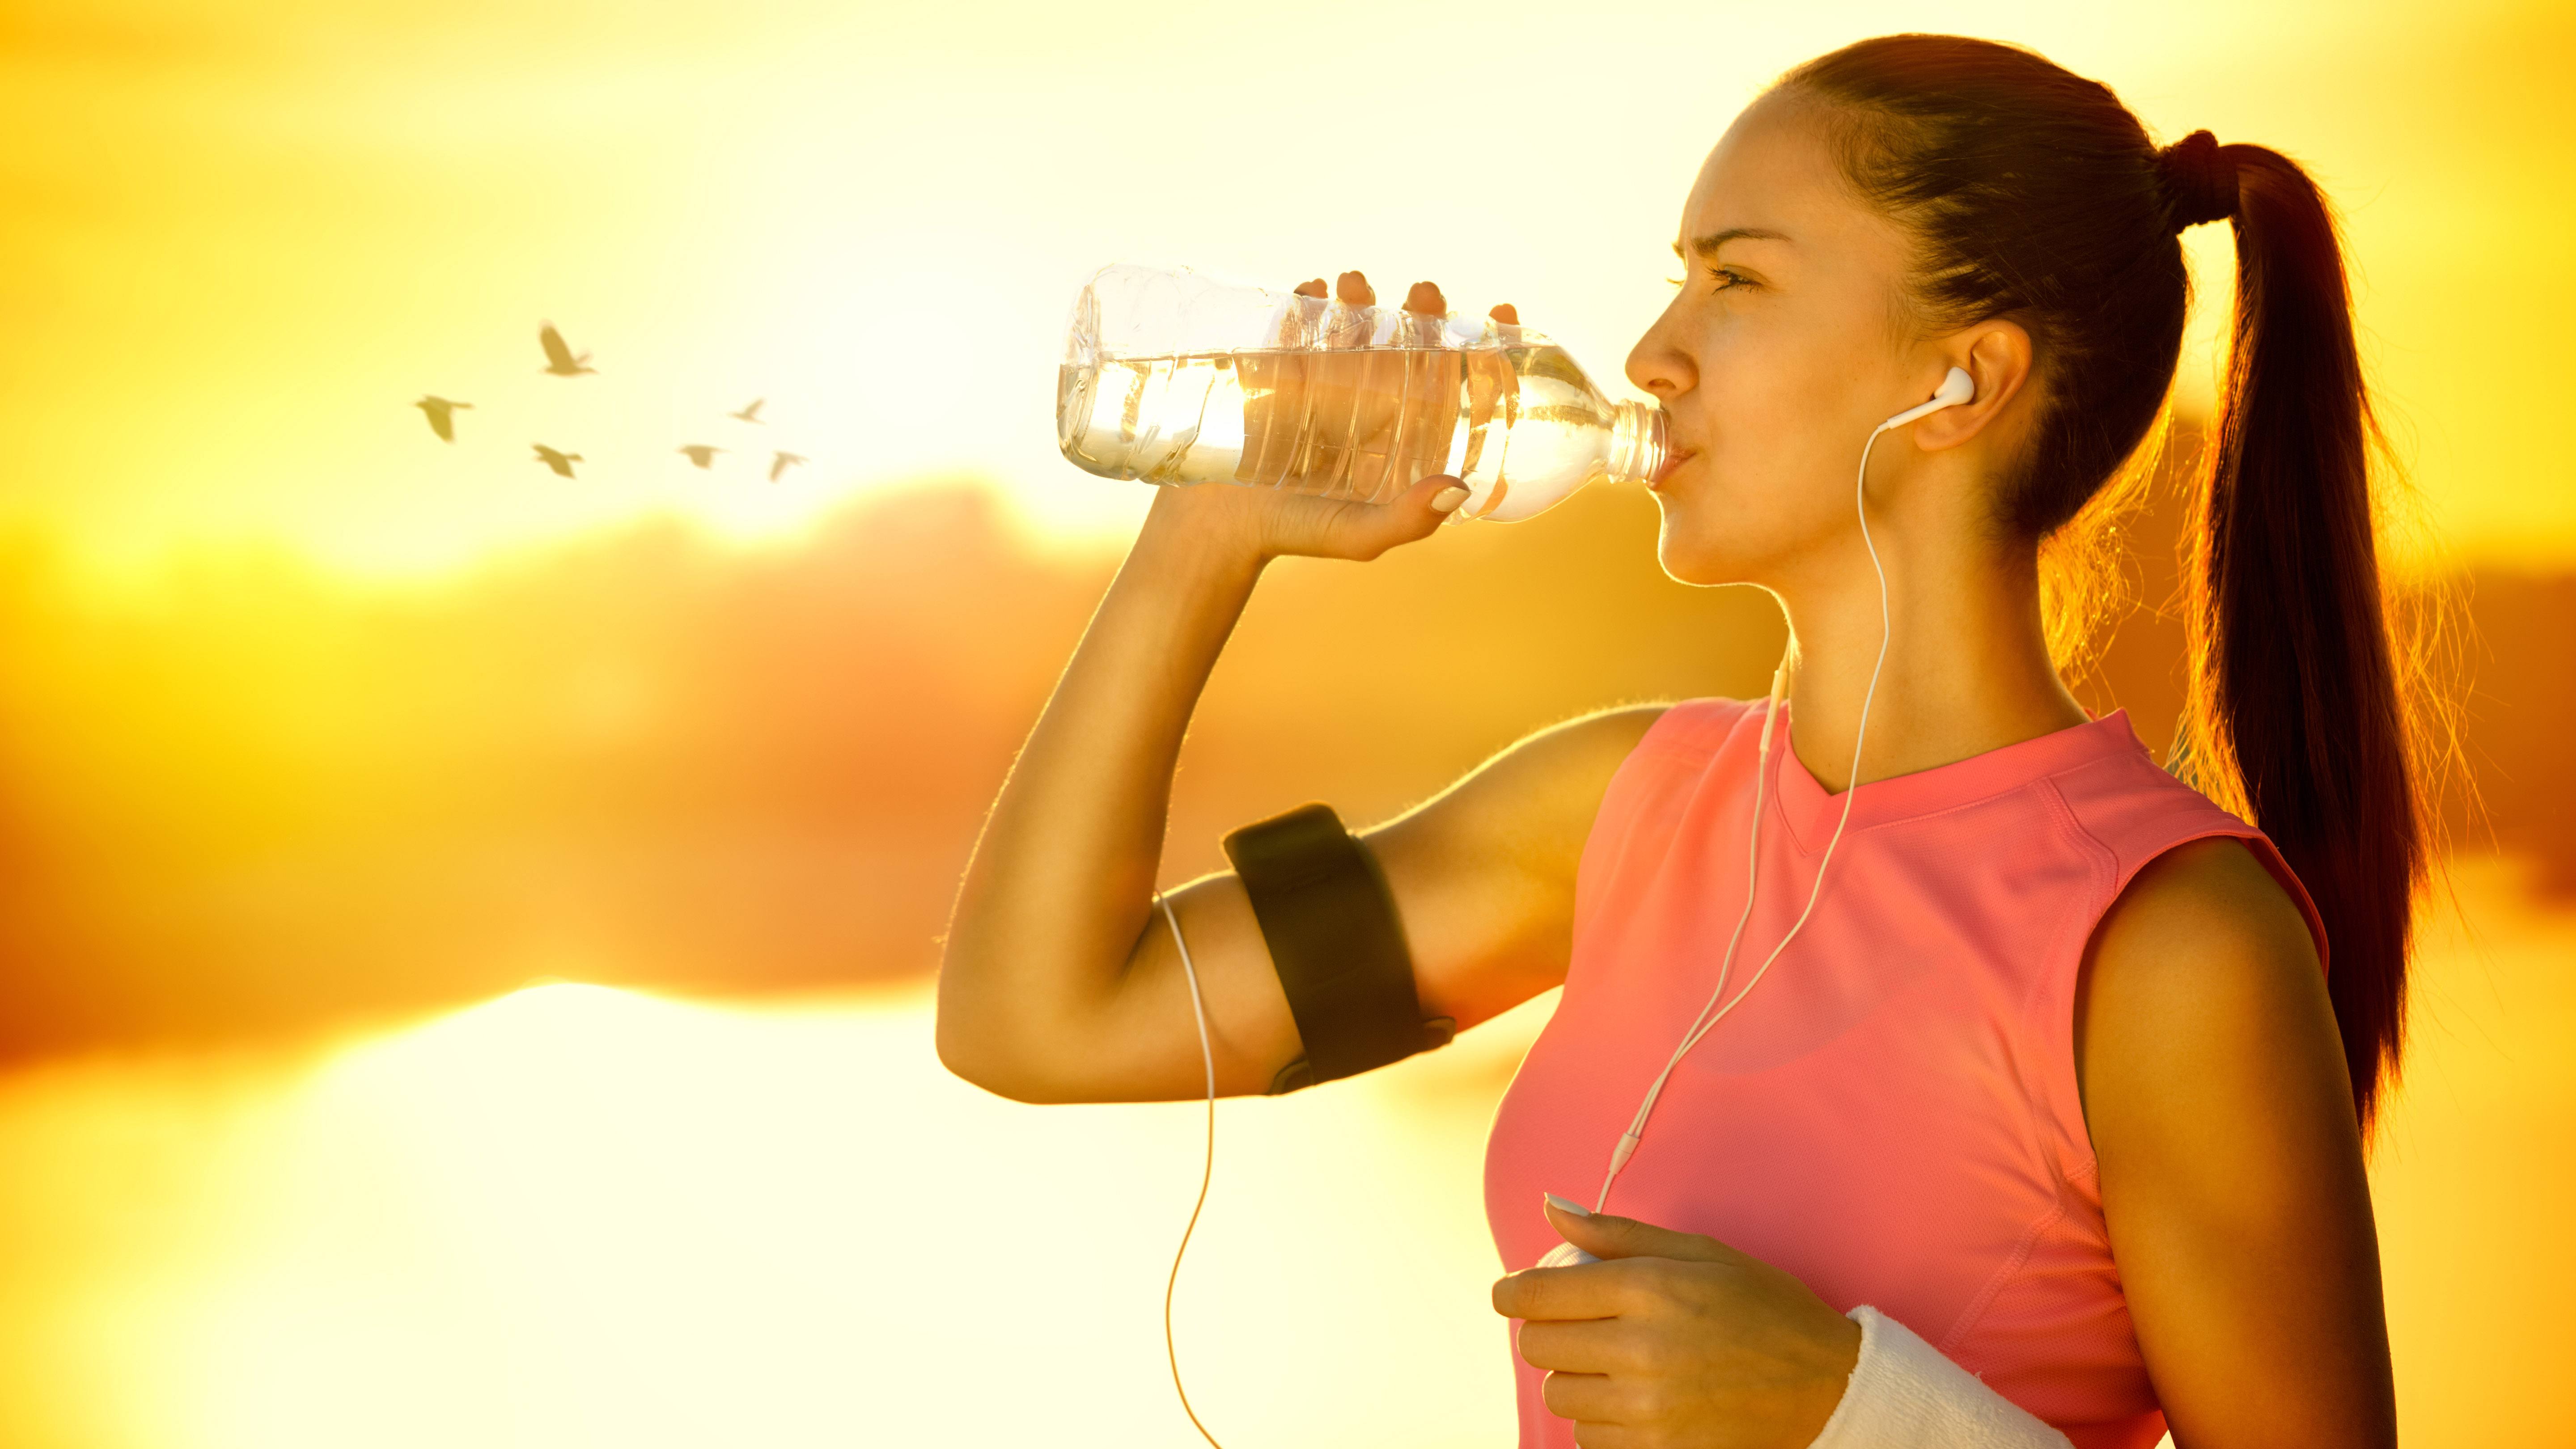 https://newsnetwork.mayoclinic.org/n7-mcnn/7bcc9724adf7b803/uploads/2019/06/a-young-woman-outdoors-on-a-sunny-day-drinking-water-and-dressed-for-running-16X9.jpg